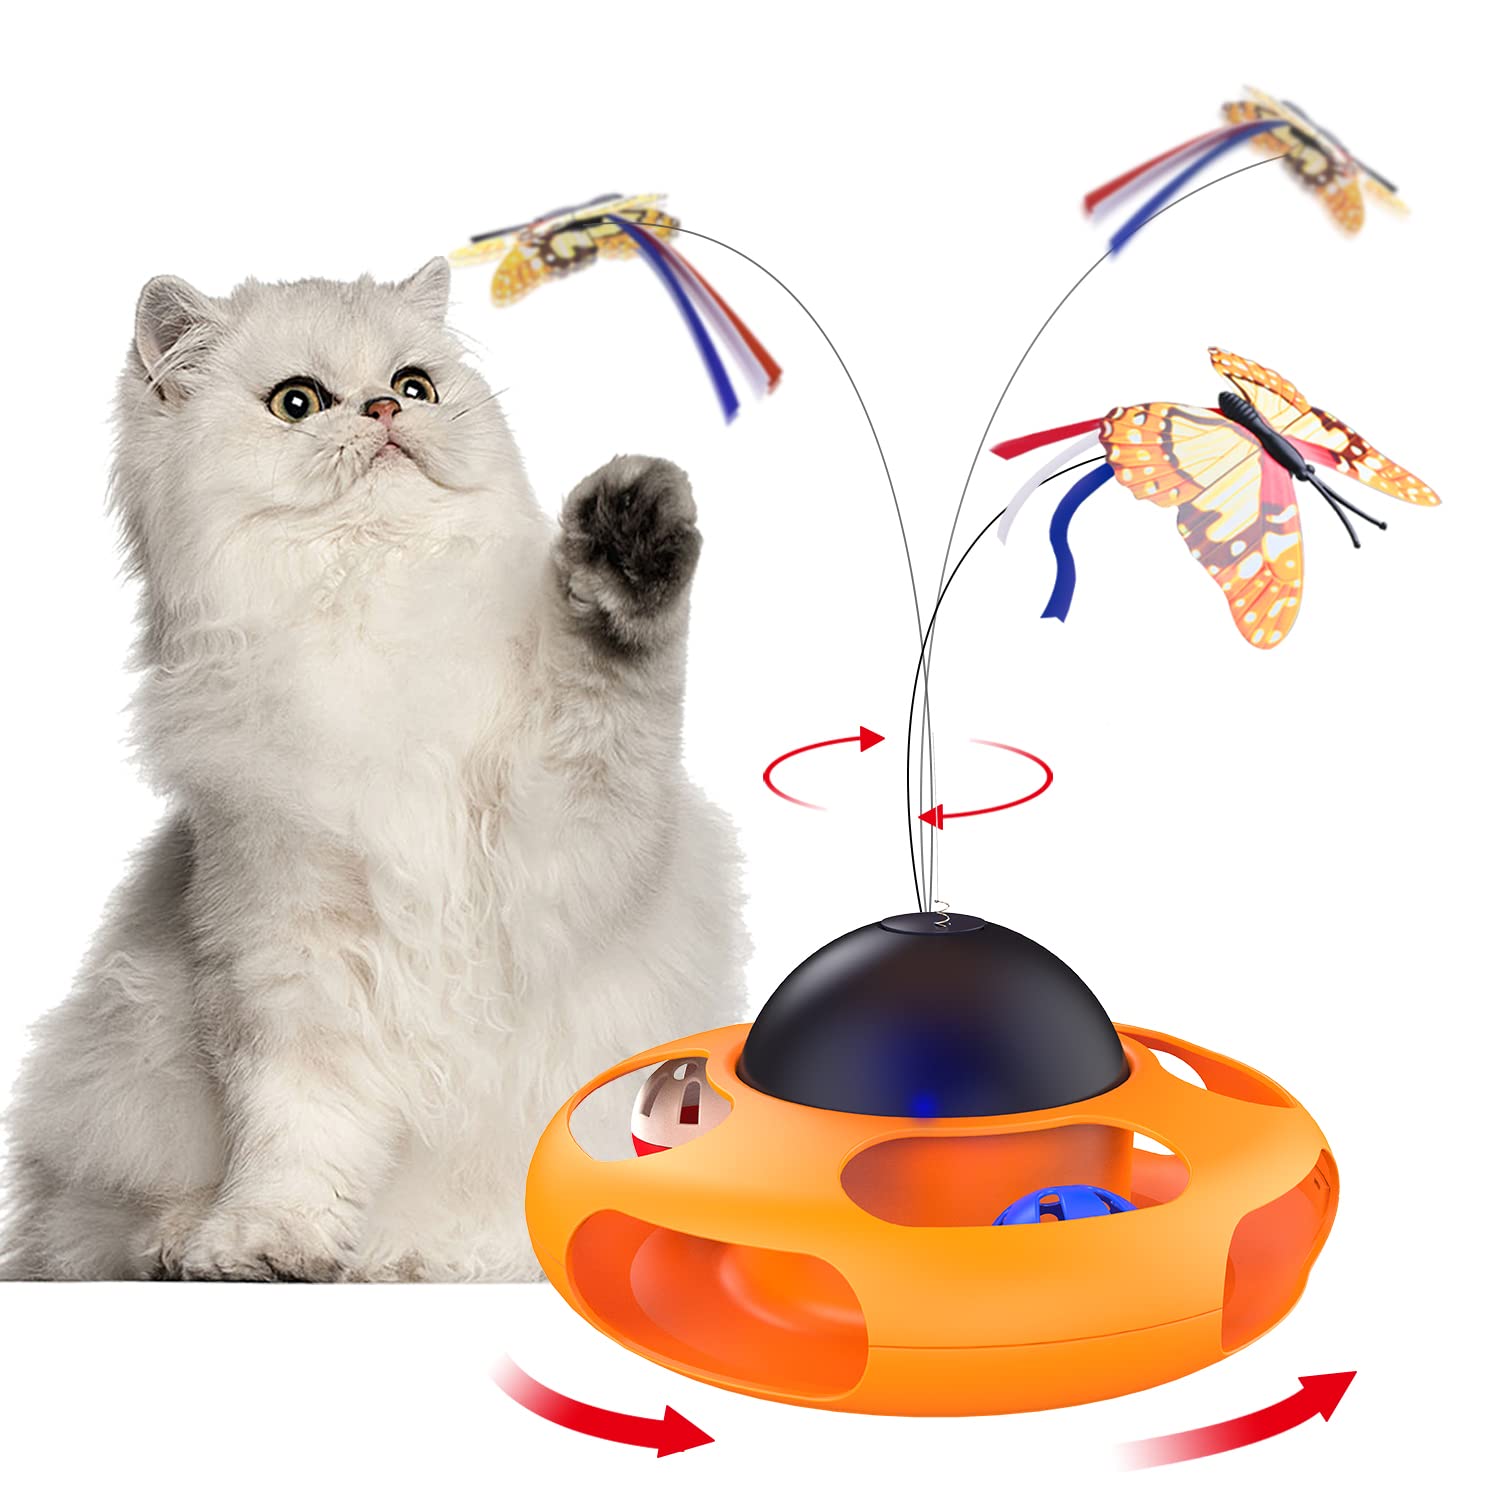 orange kitten playing energetically with interactive cat toy